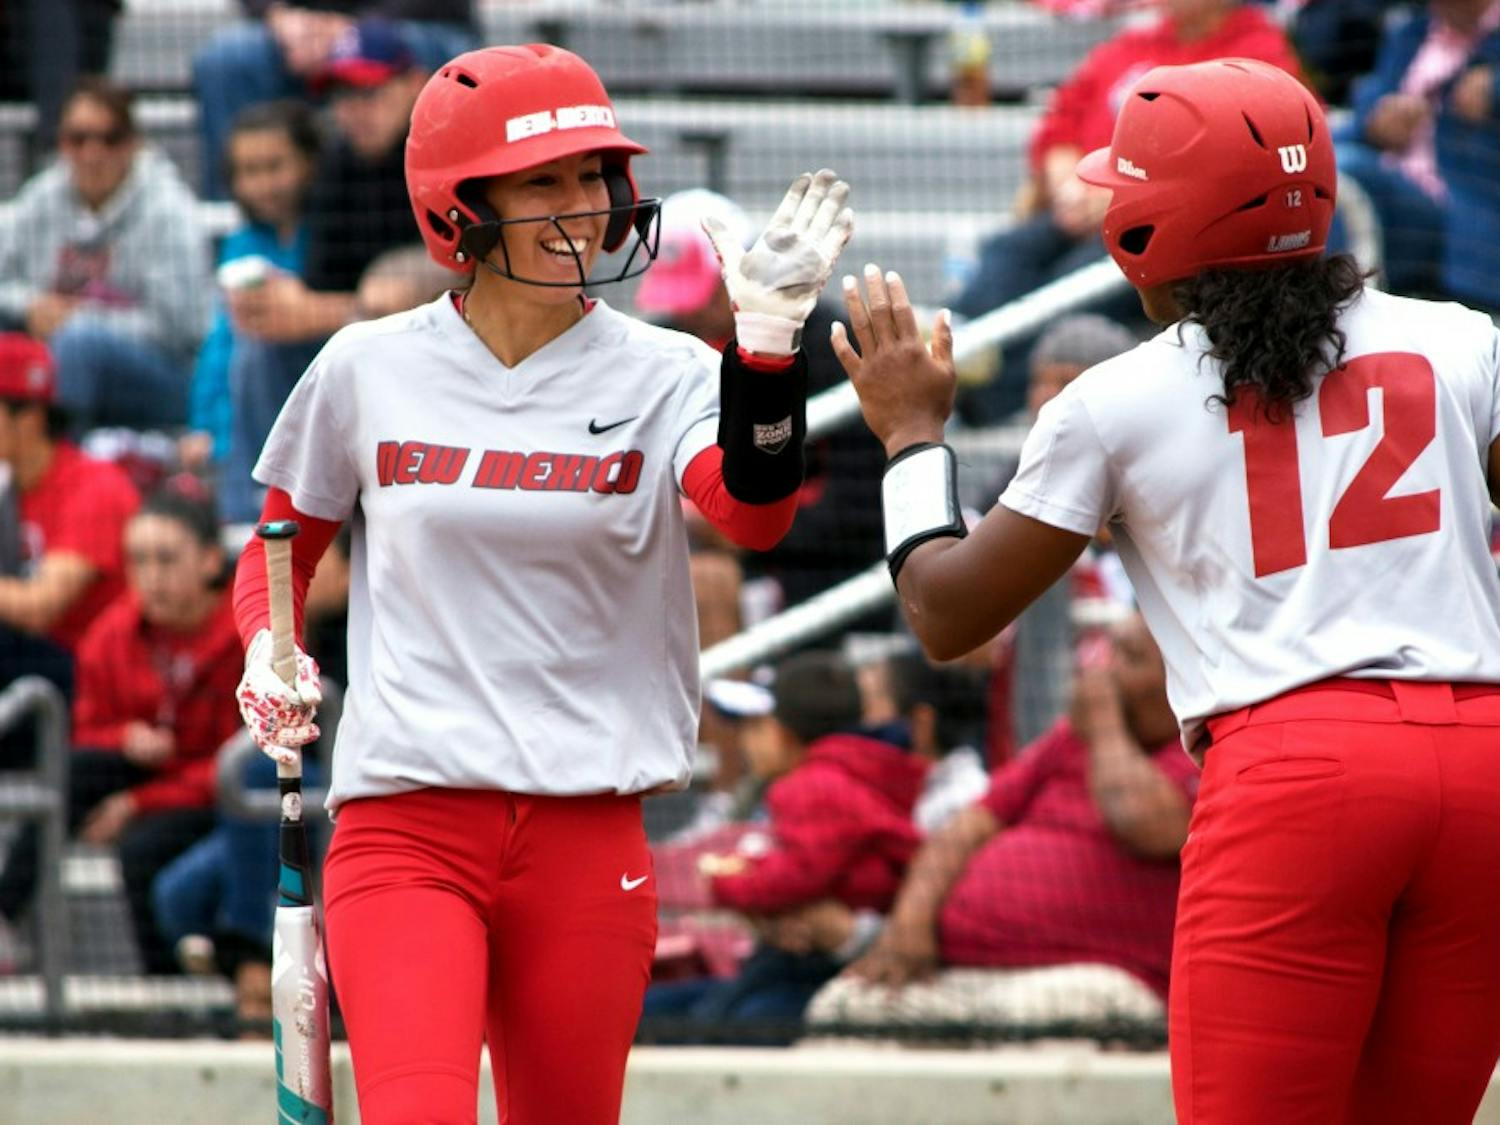 Redshirt senior Karissa Haleman celebrates with Mariah Rimmer as she makes her way back to the dugout Sunday afternoon at the Lobo Softball Field. The Lobos won two out of their three games against Utah State this past weekend.&nbsp;&nbsp;